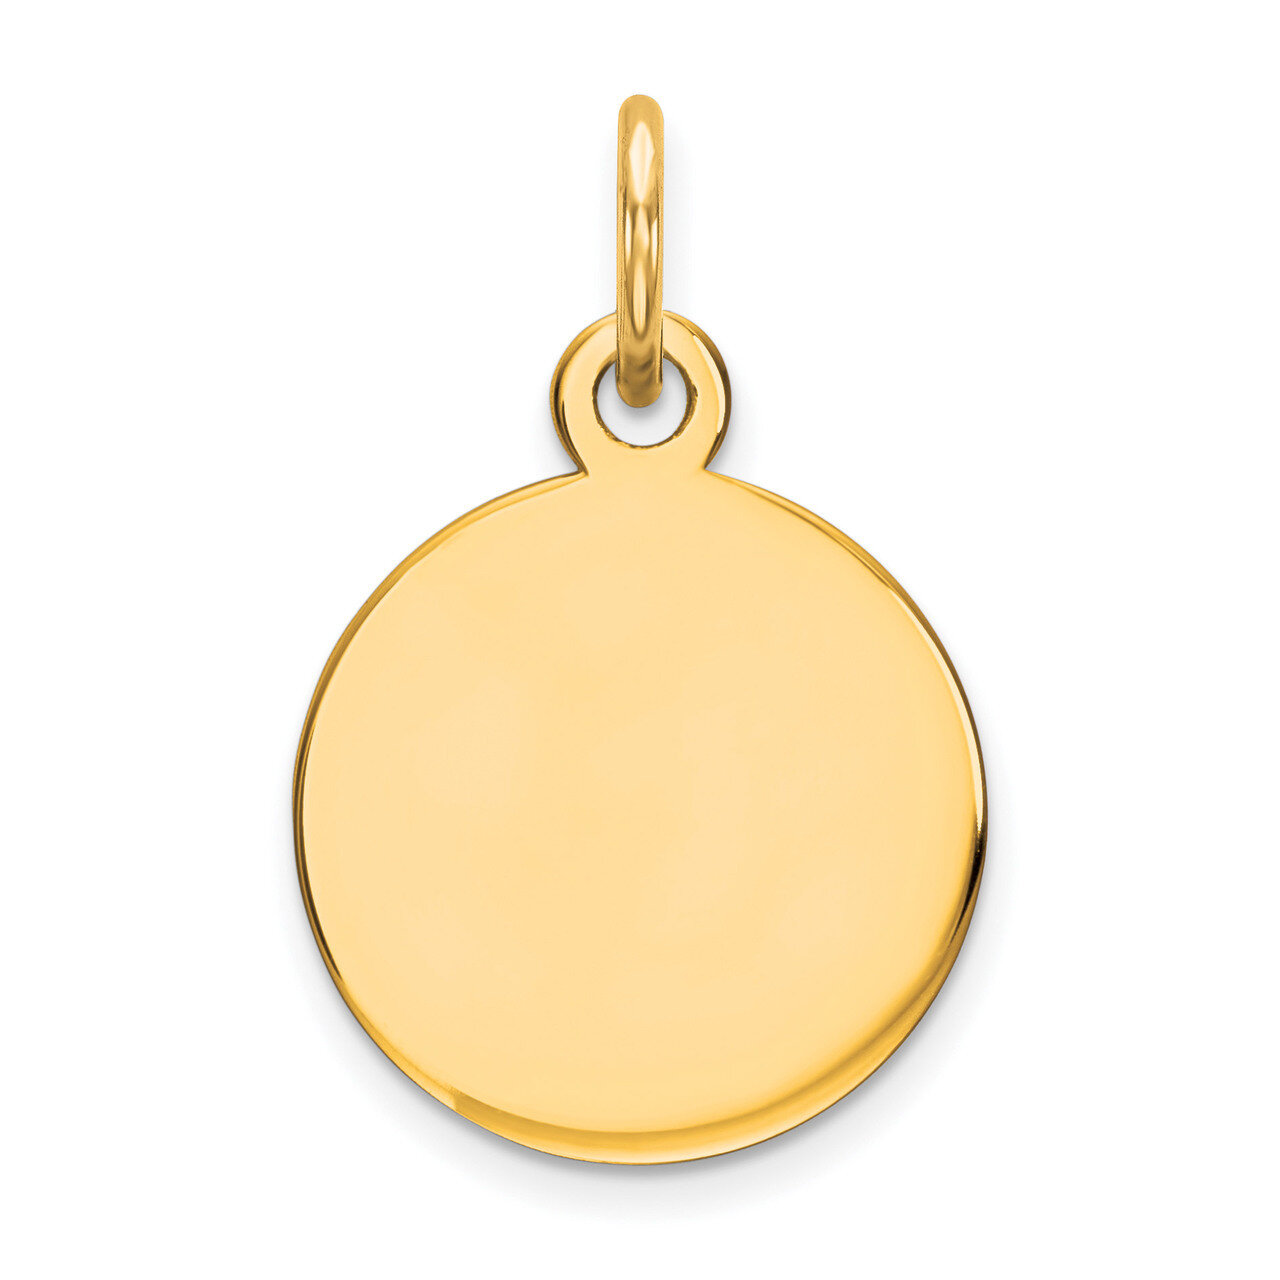 Engravable Round Polished Disc Charm Sterling Silver Gold-plated QM497G/27